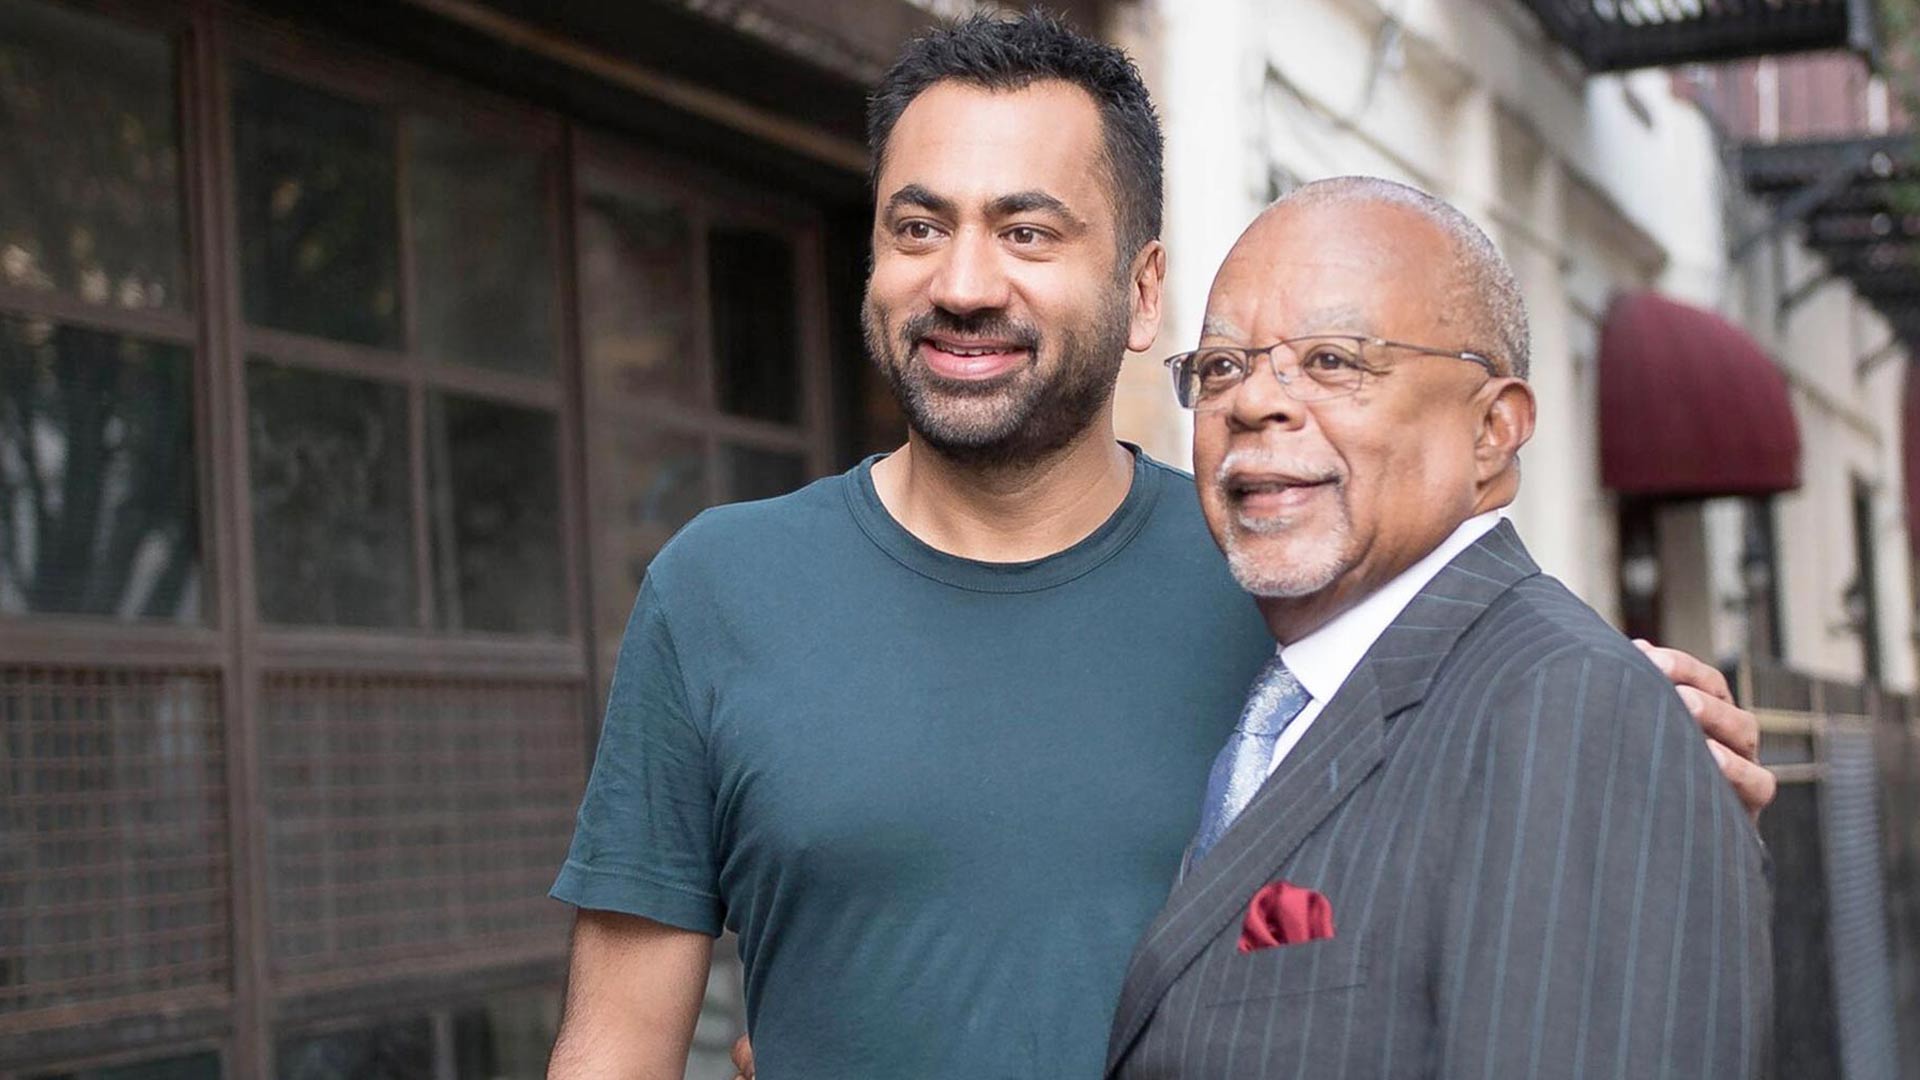 Host Henry Louis Gates, Jr. with Kal Penn while taping Finding Your Roots.

